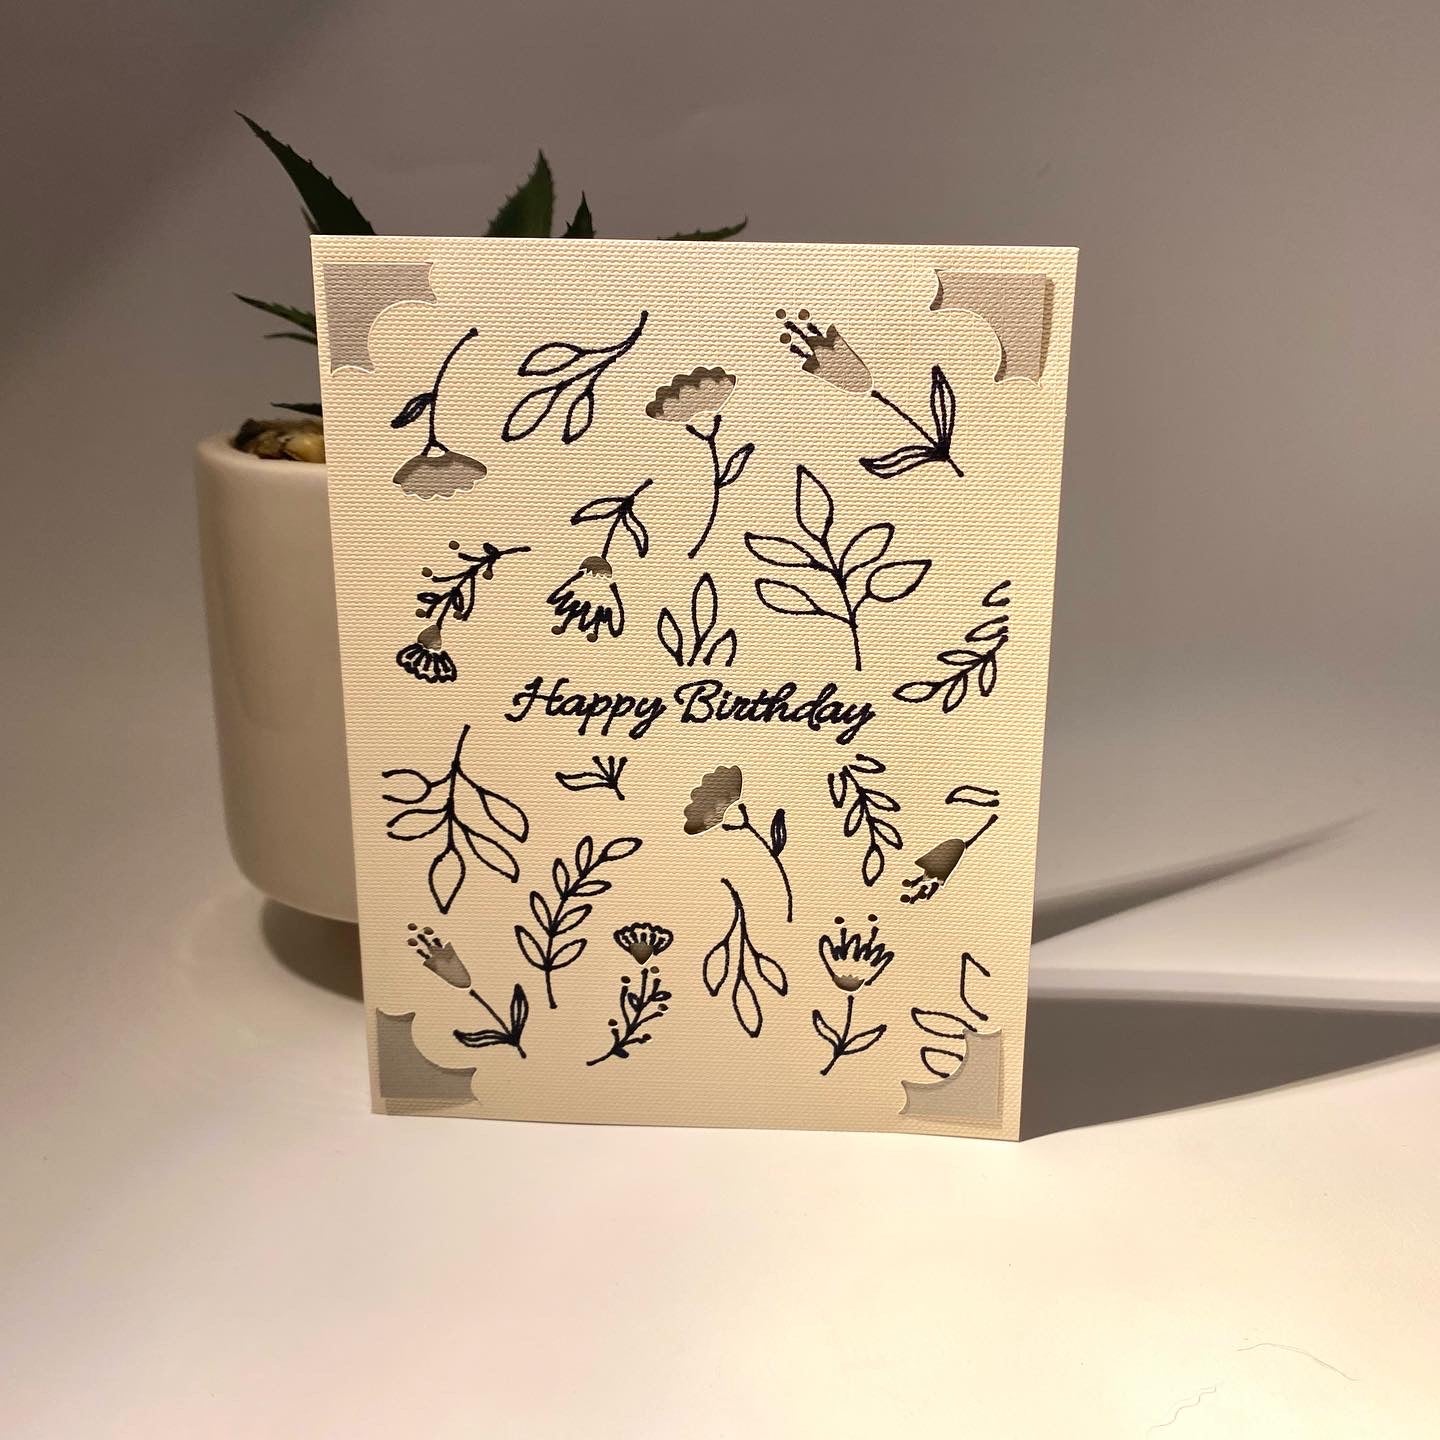 Custom cards for any occasion